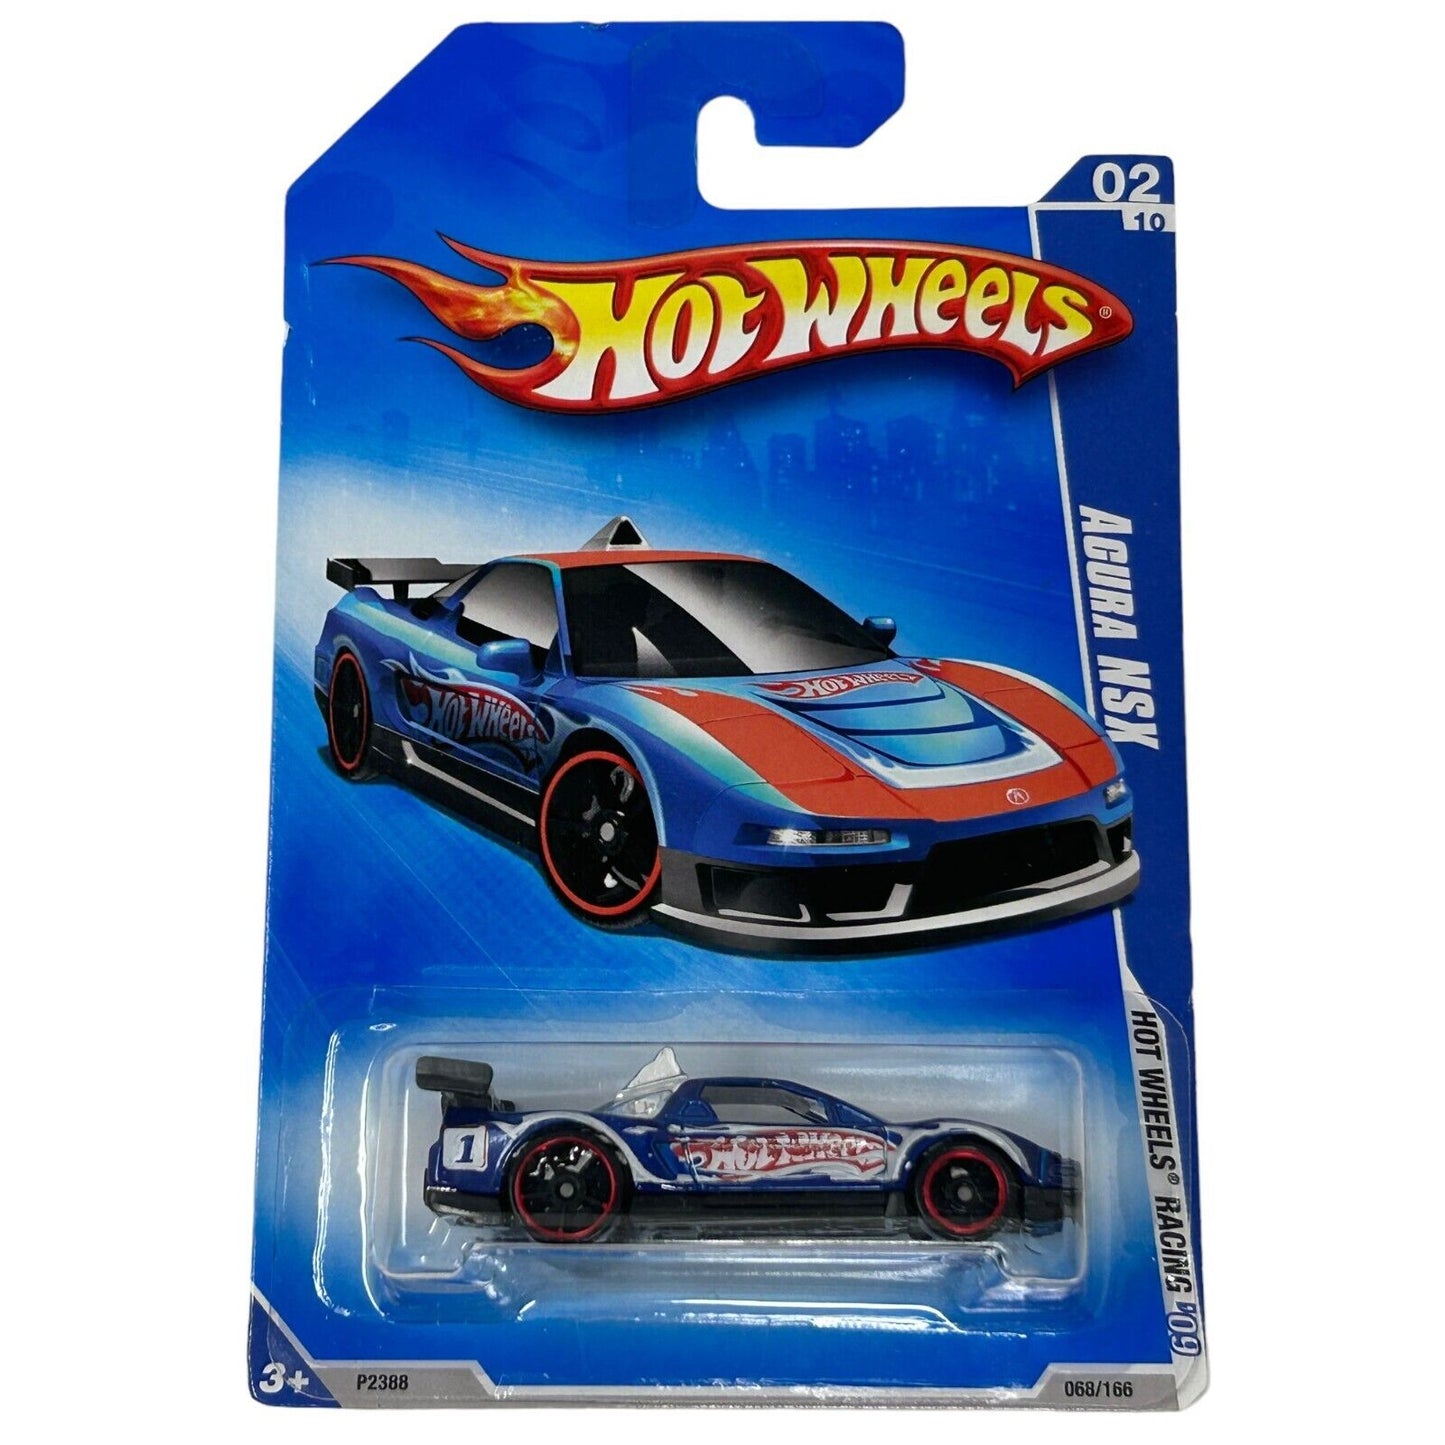 Acura NSX Hot Wheels Collectible Diecast Car Blue 2009 Hot Wheels Racing New